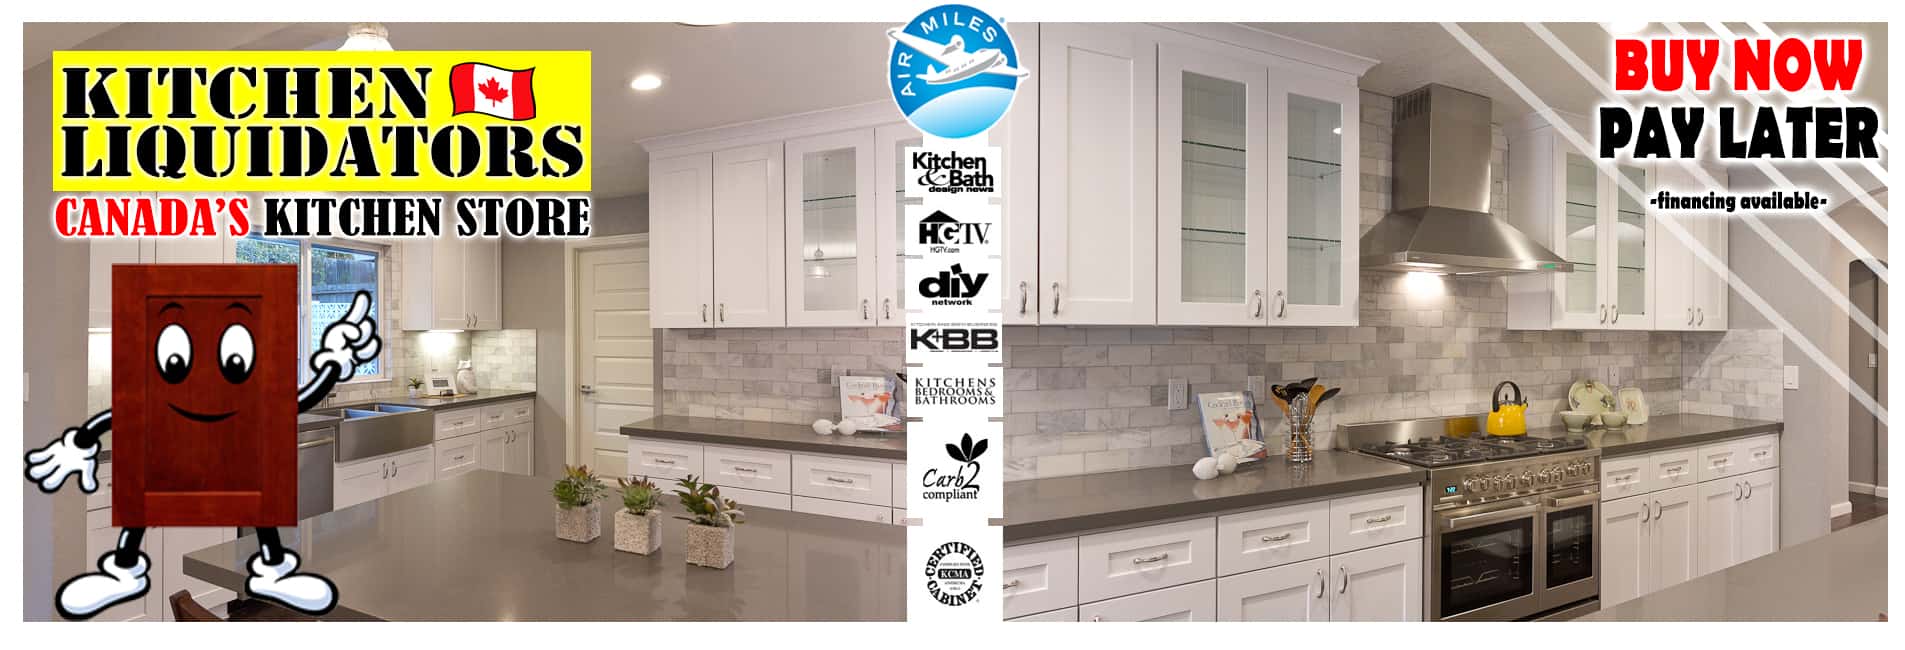 Kitchen Cabinets Factory S, Kitchen Cabinets Clearance Canada